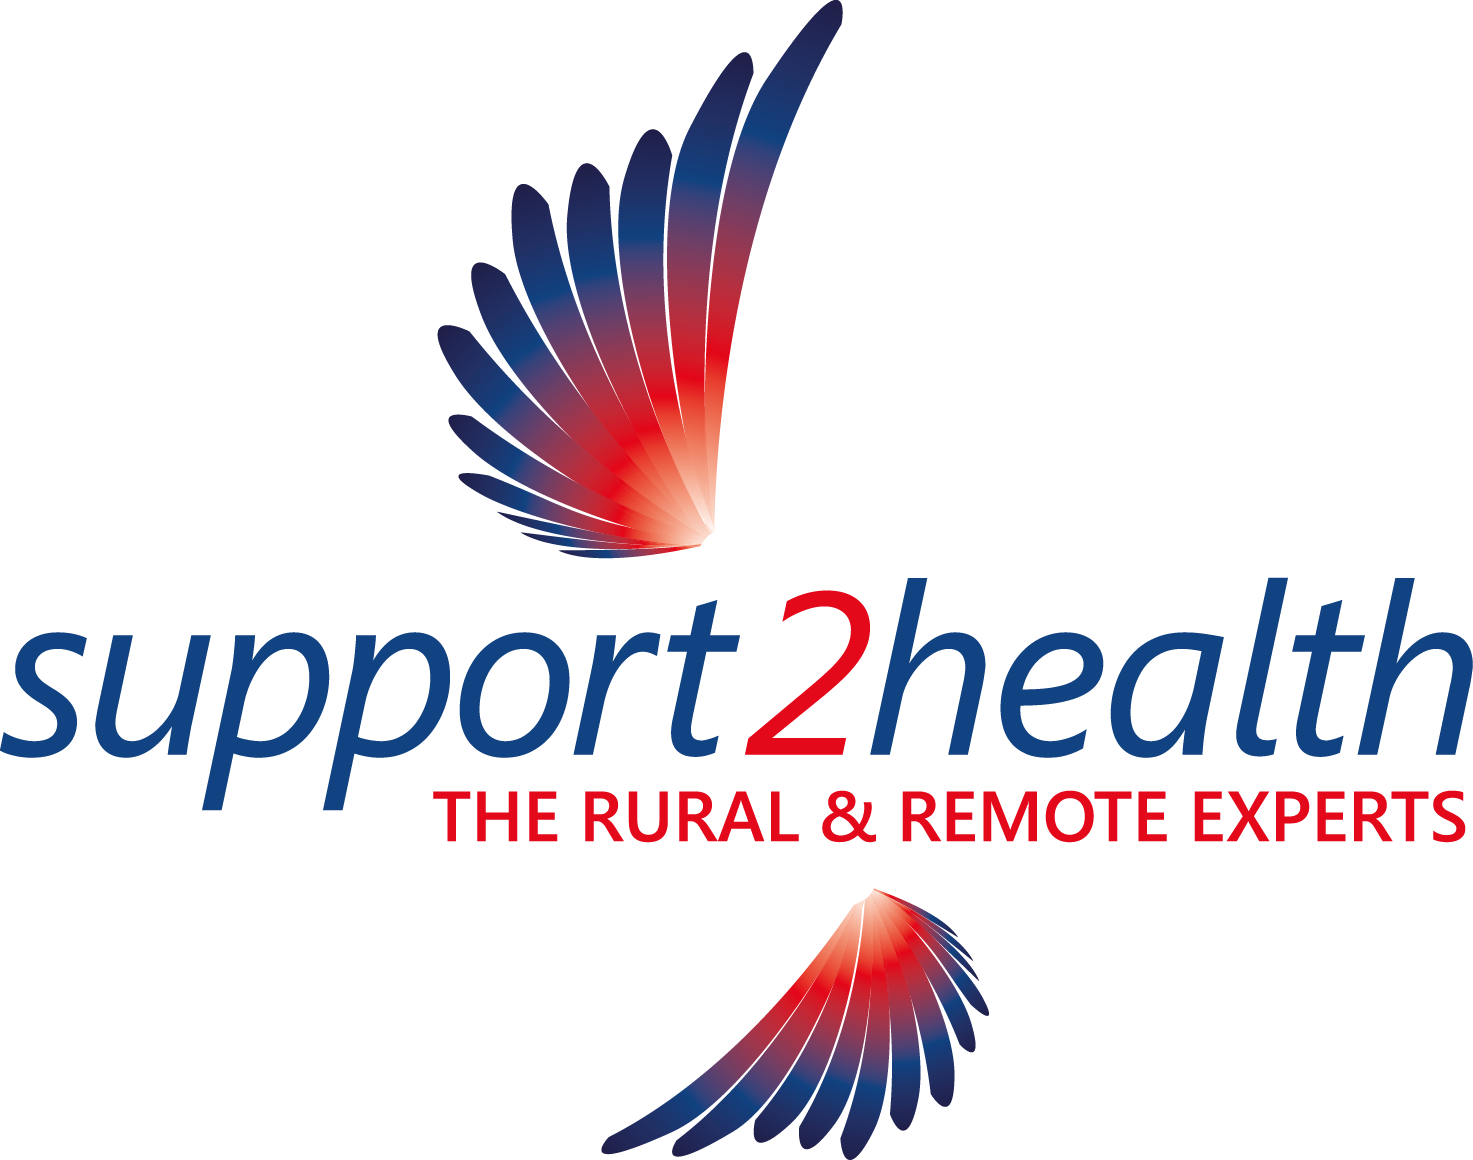 Support2Health